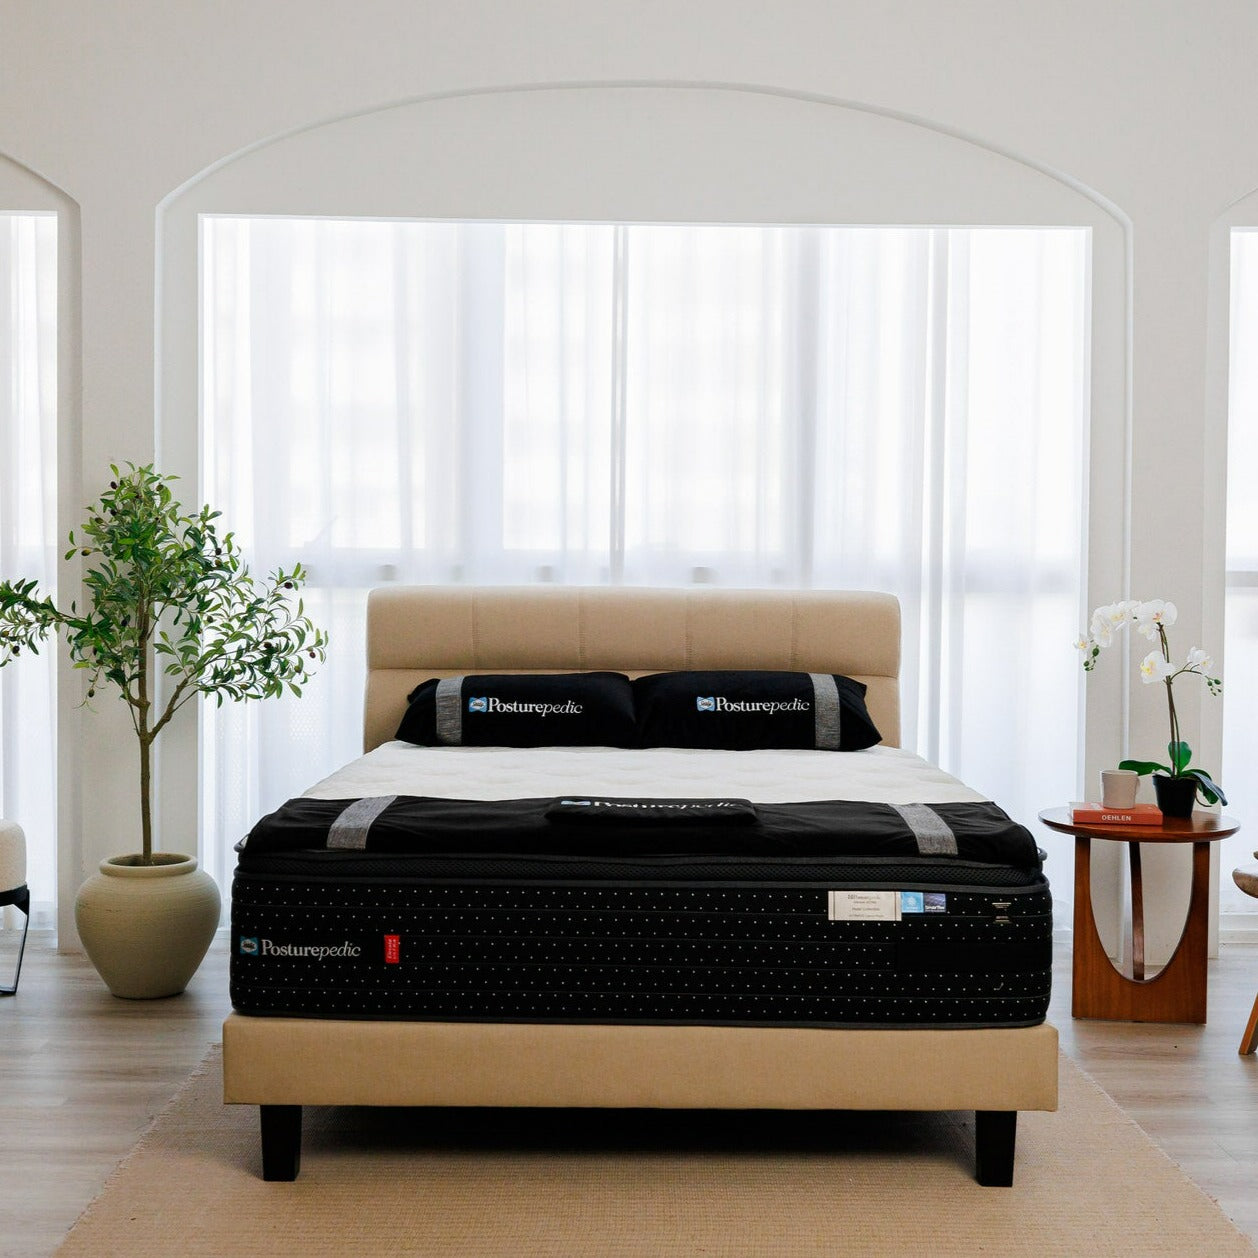 Sealy Posturepedic Hotel Collection - Ultimate Luxury Firm Mattress